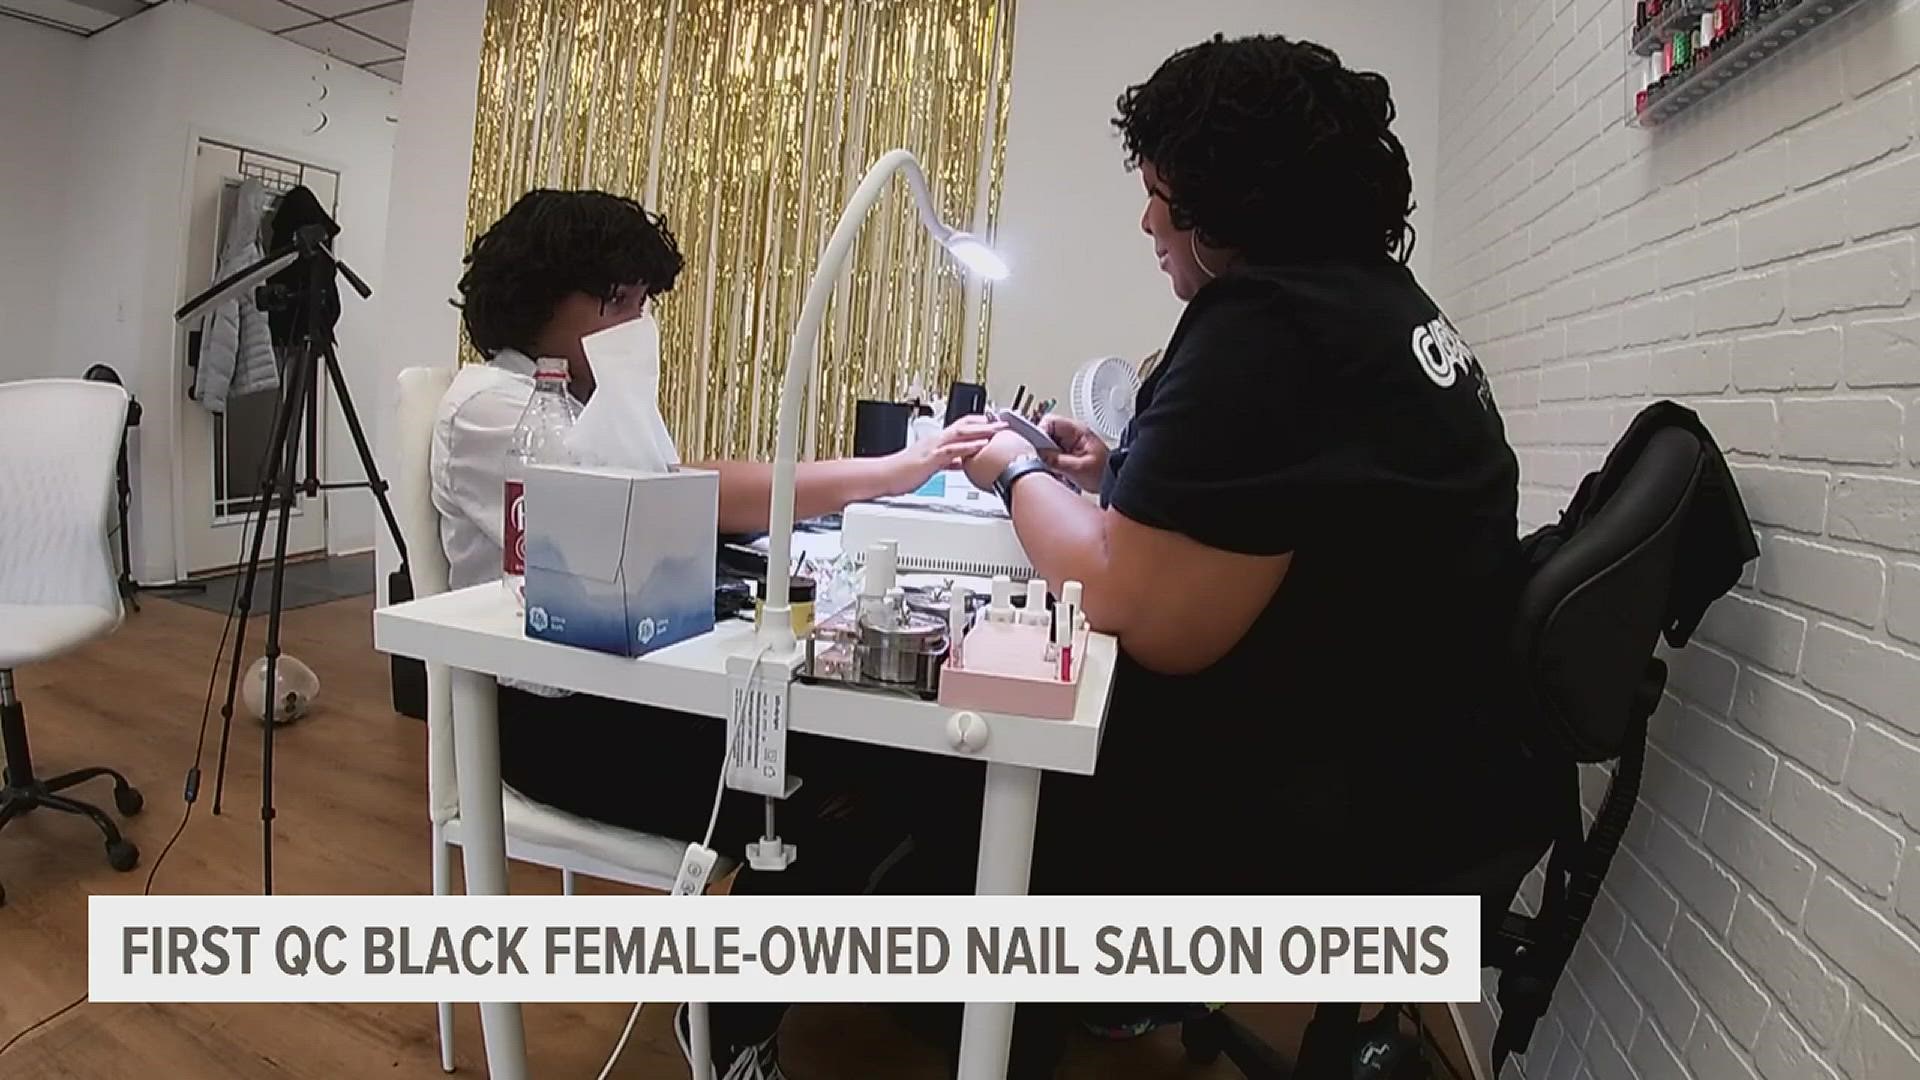 Royal Lotus Nailz had its grand opening party, Saturday, Jan. 21, and owner Nadiyah Coly reflects on the journey to get to where she is.